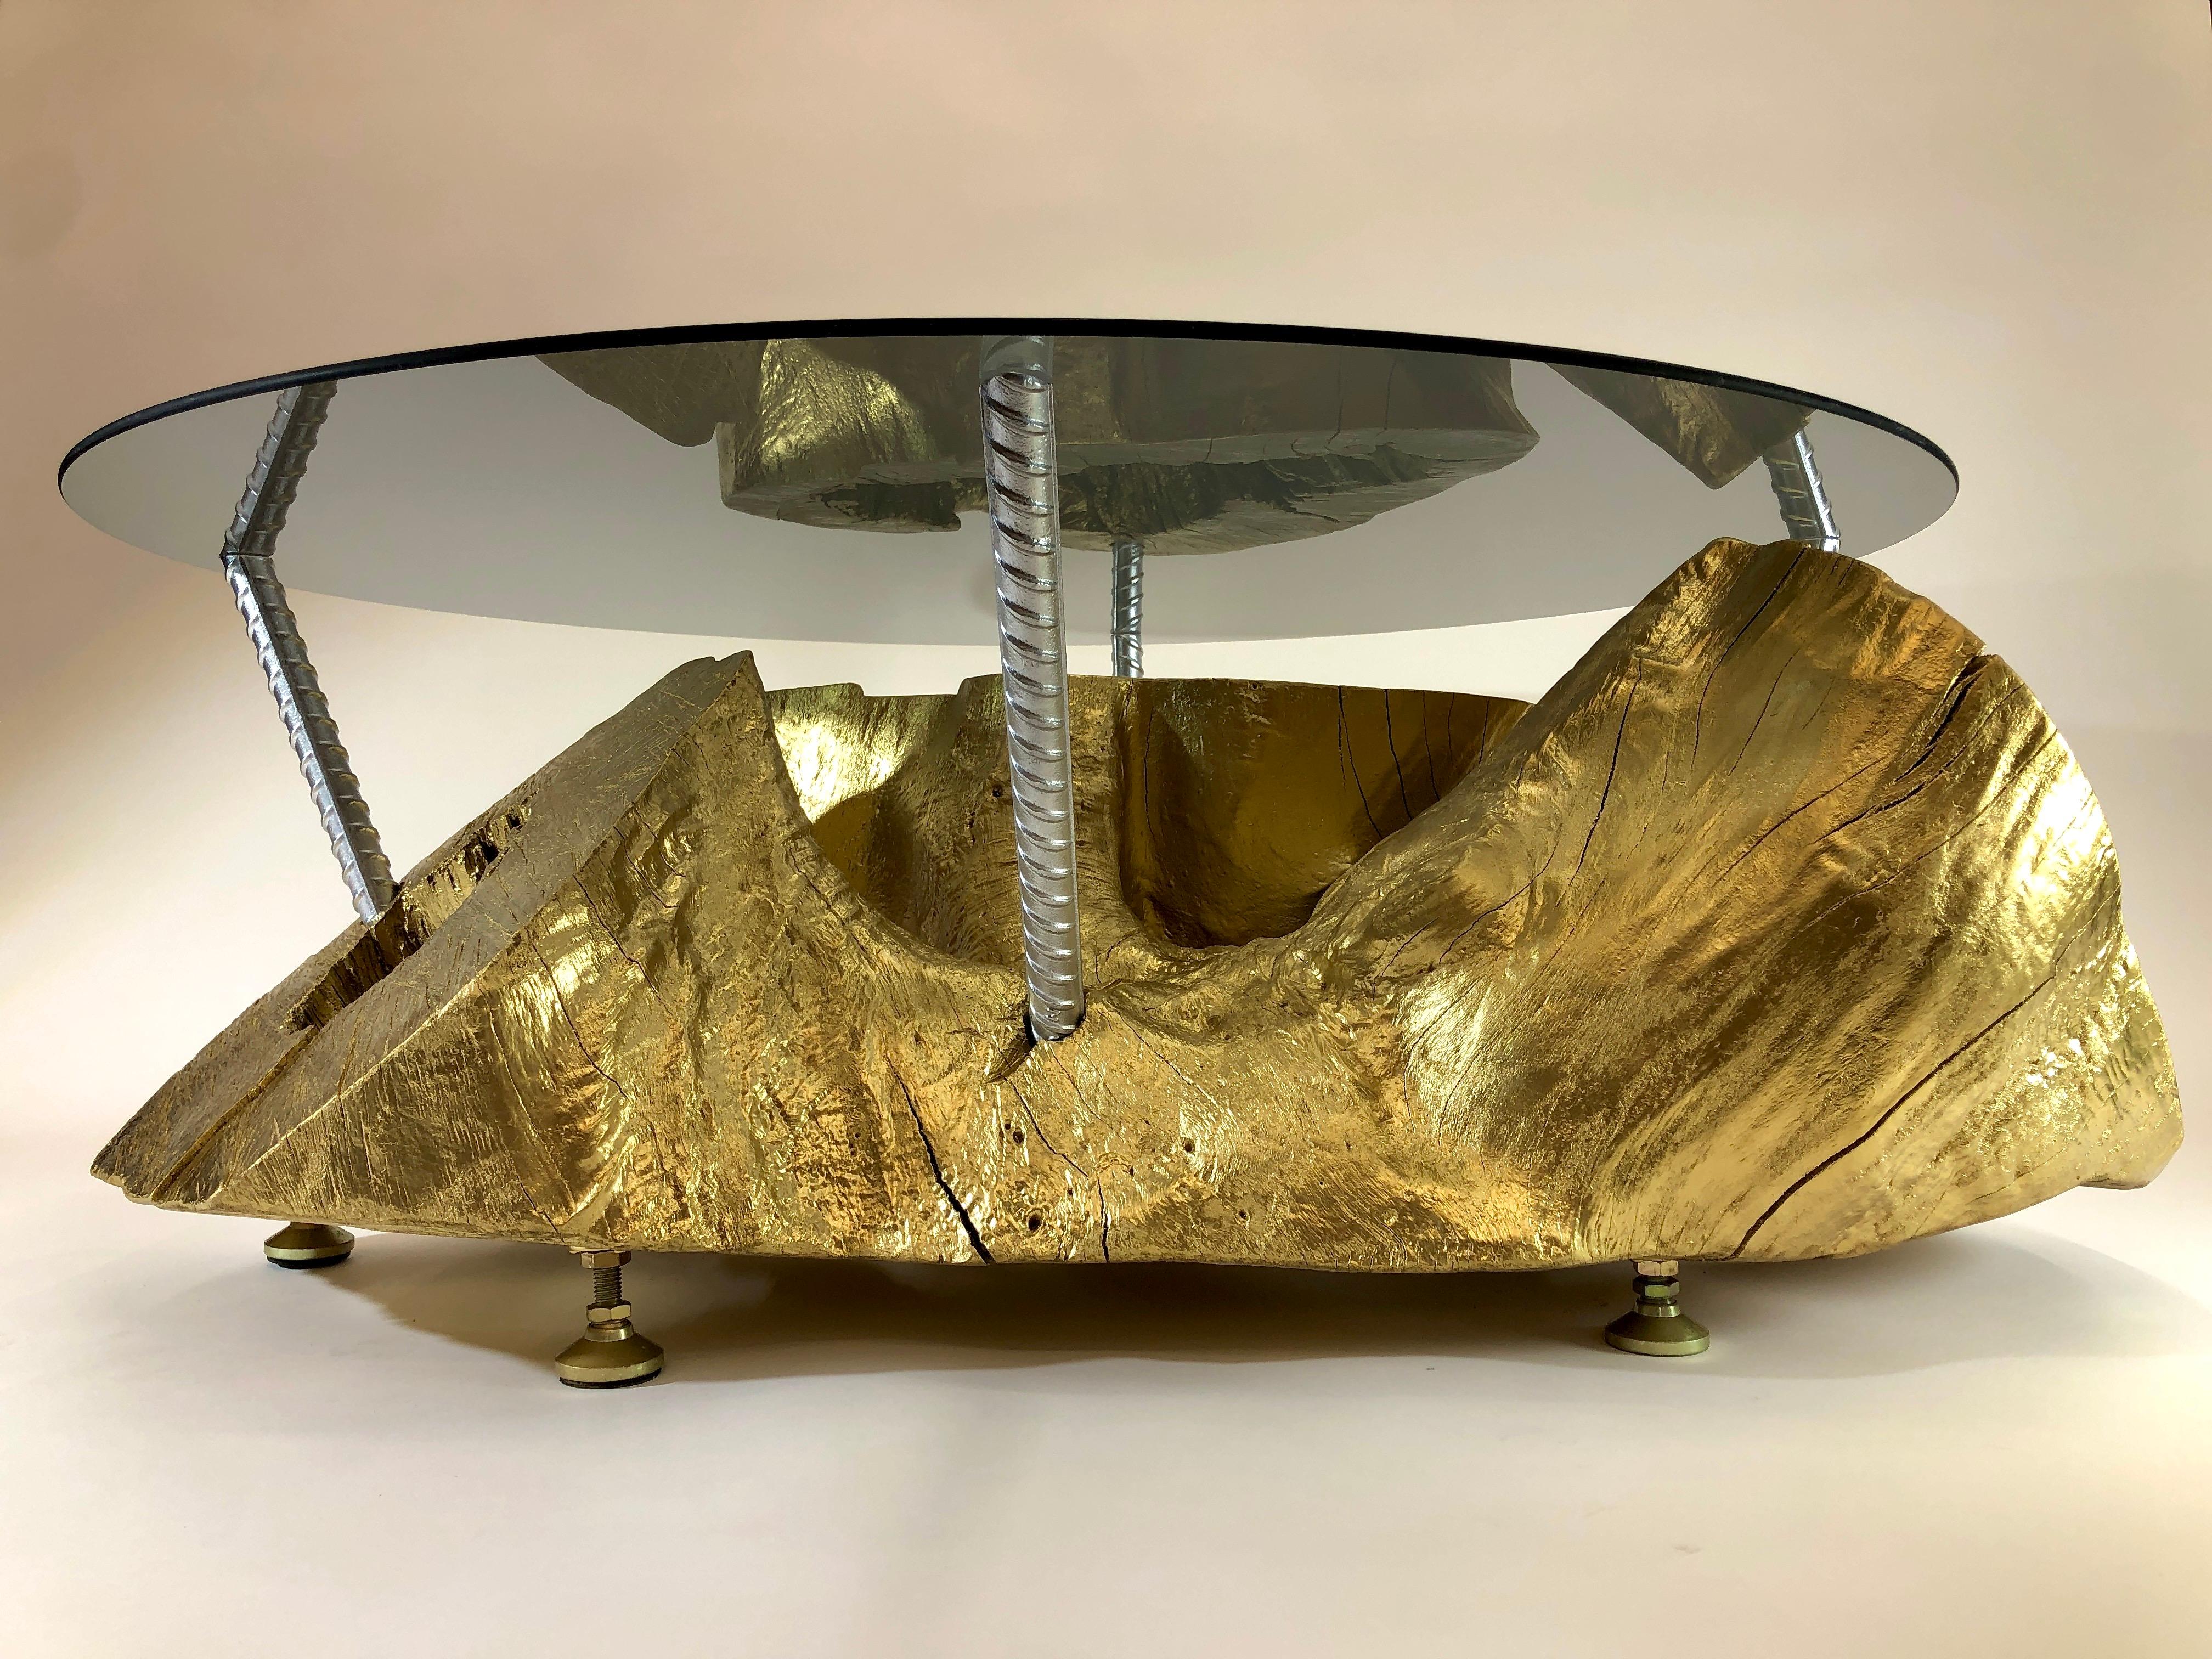 Metal Tree Stump Coffee Table In Gold With Smoked Glass Top For Sale